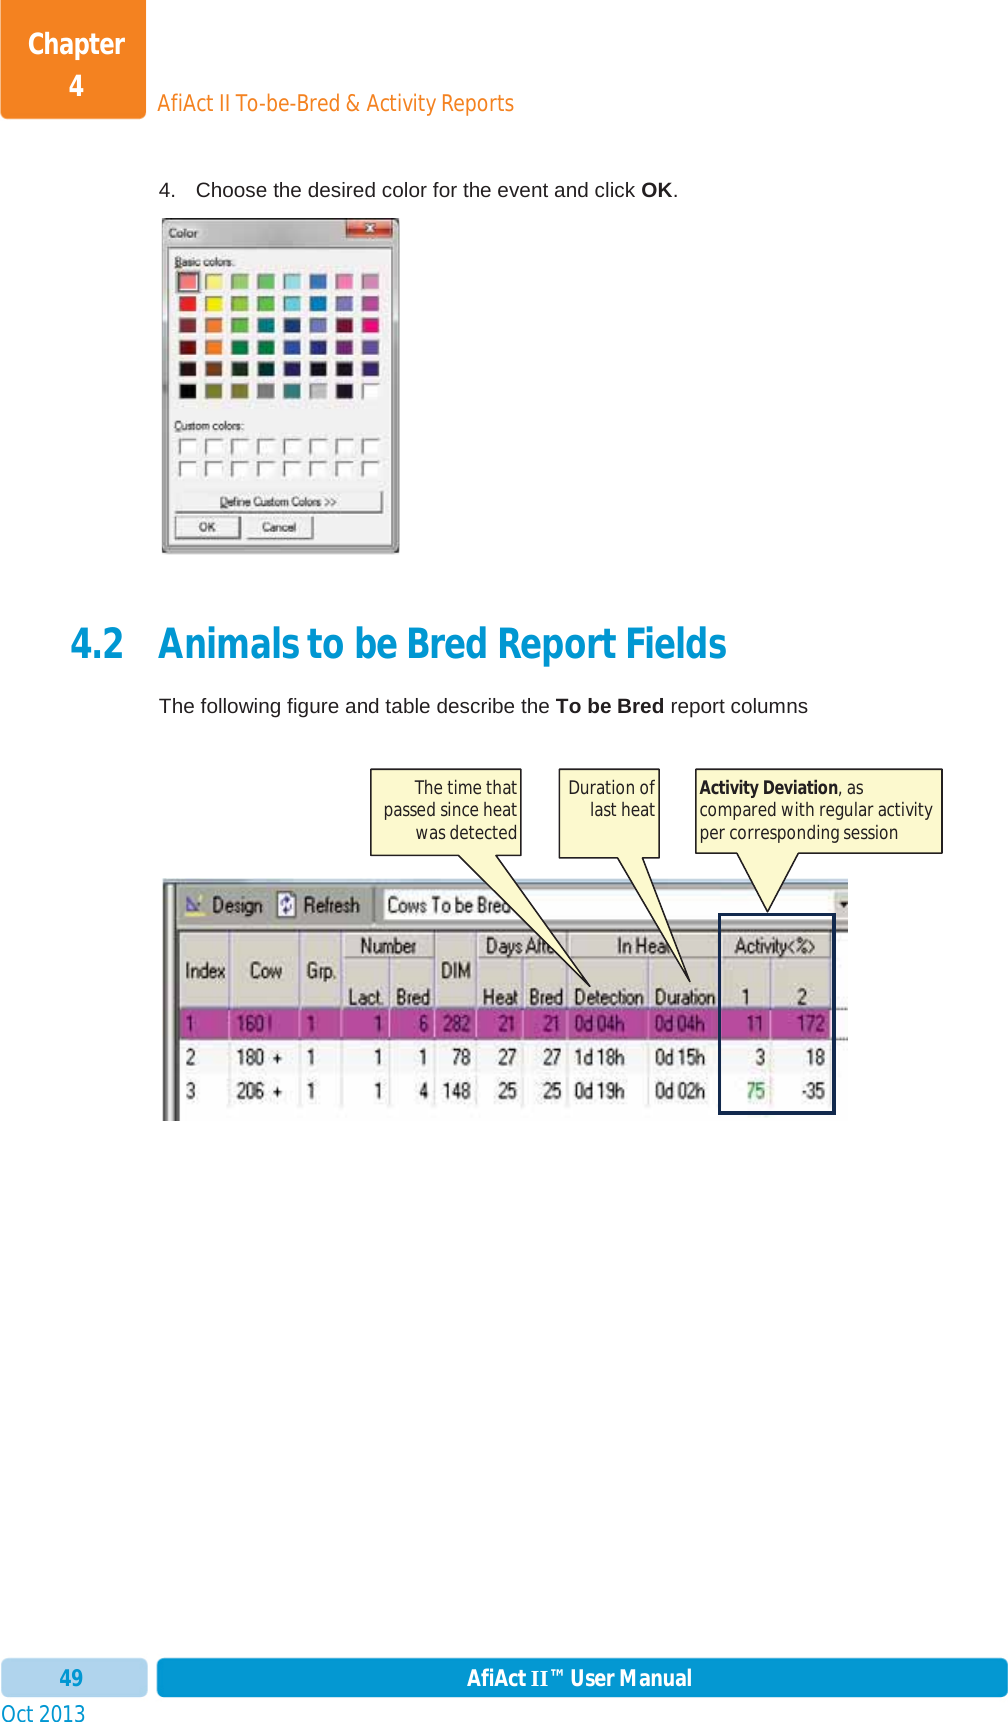 Oct 2013 AfiAct II™ User Manual49AfiAct II To-be-Bred &amp; Activity ReportsChapter 44.  Choose the desired color for the event and click OK.4.2 Animals to be Bred Report Fields The following figure and table describe the To be Bred report columns Activity Deviation, as compared with regular activity per corresponding session The time that passed since heat was detected Duration of last heat 